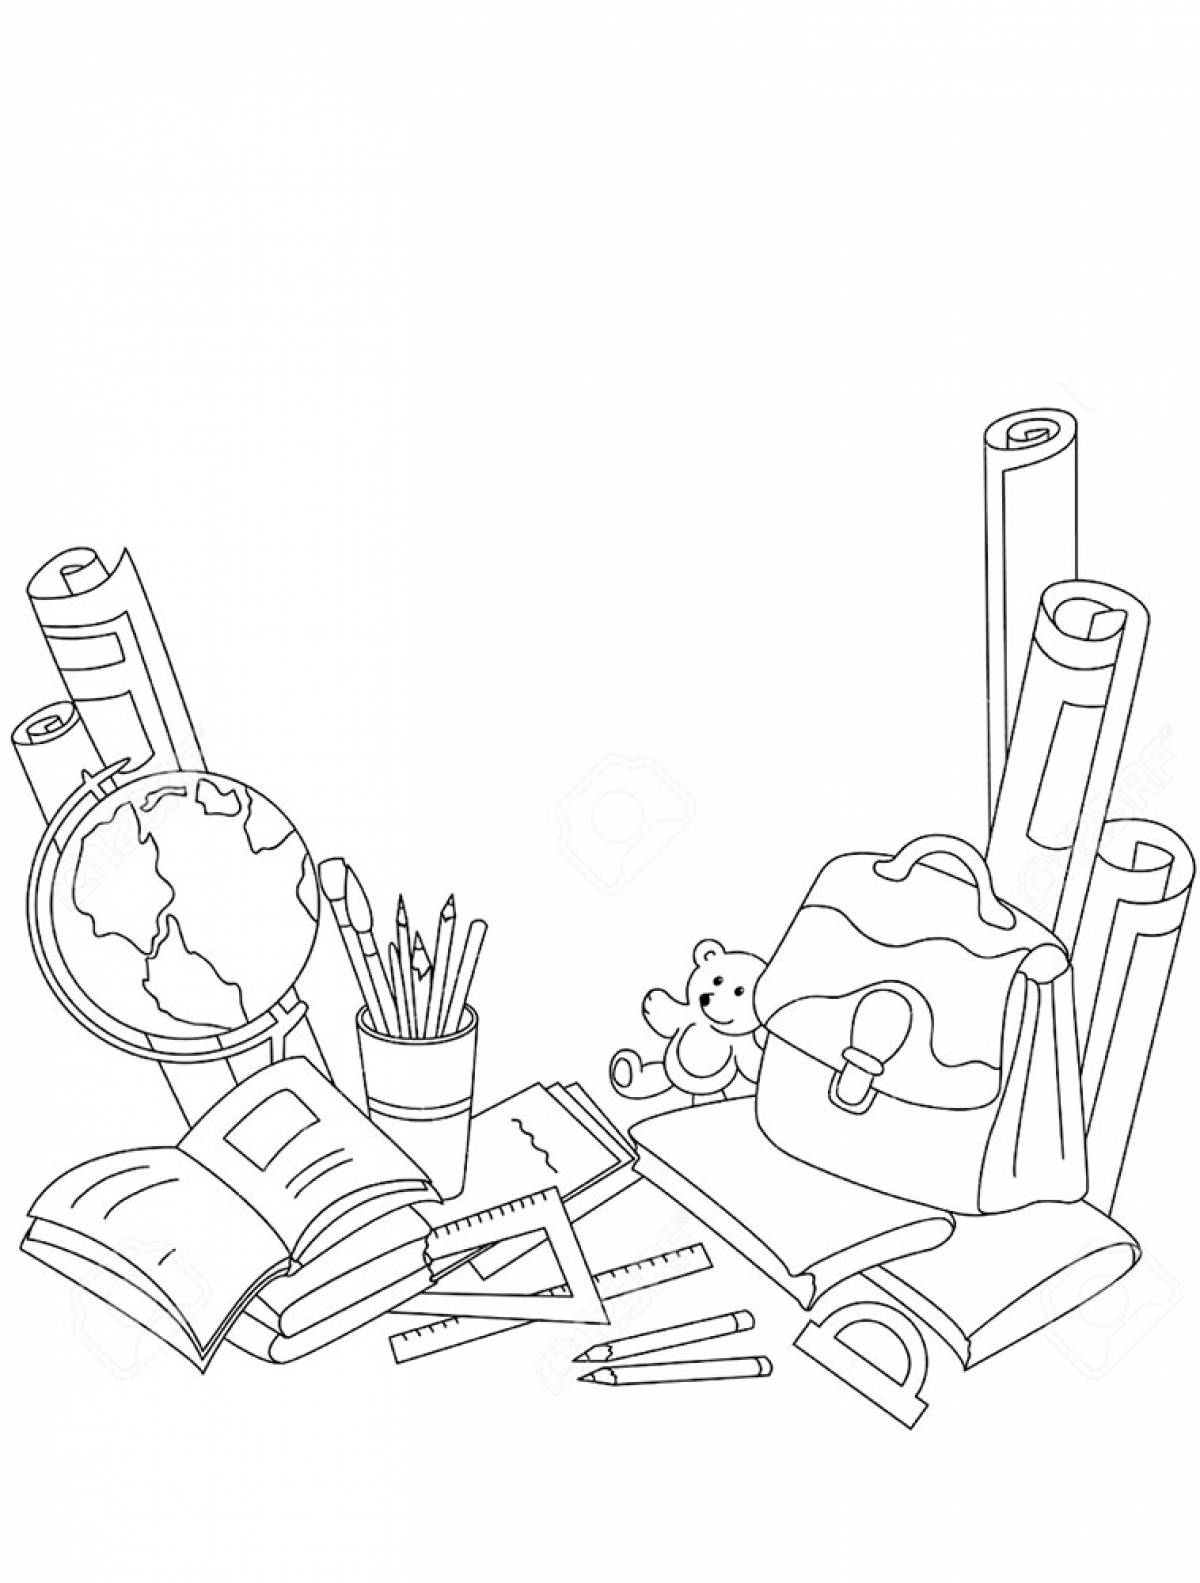 Coloring pages for children